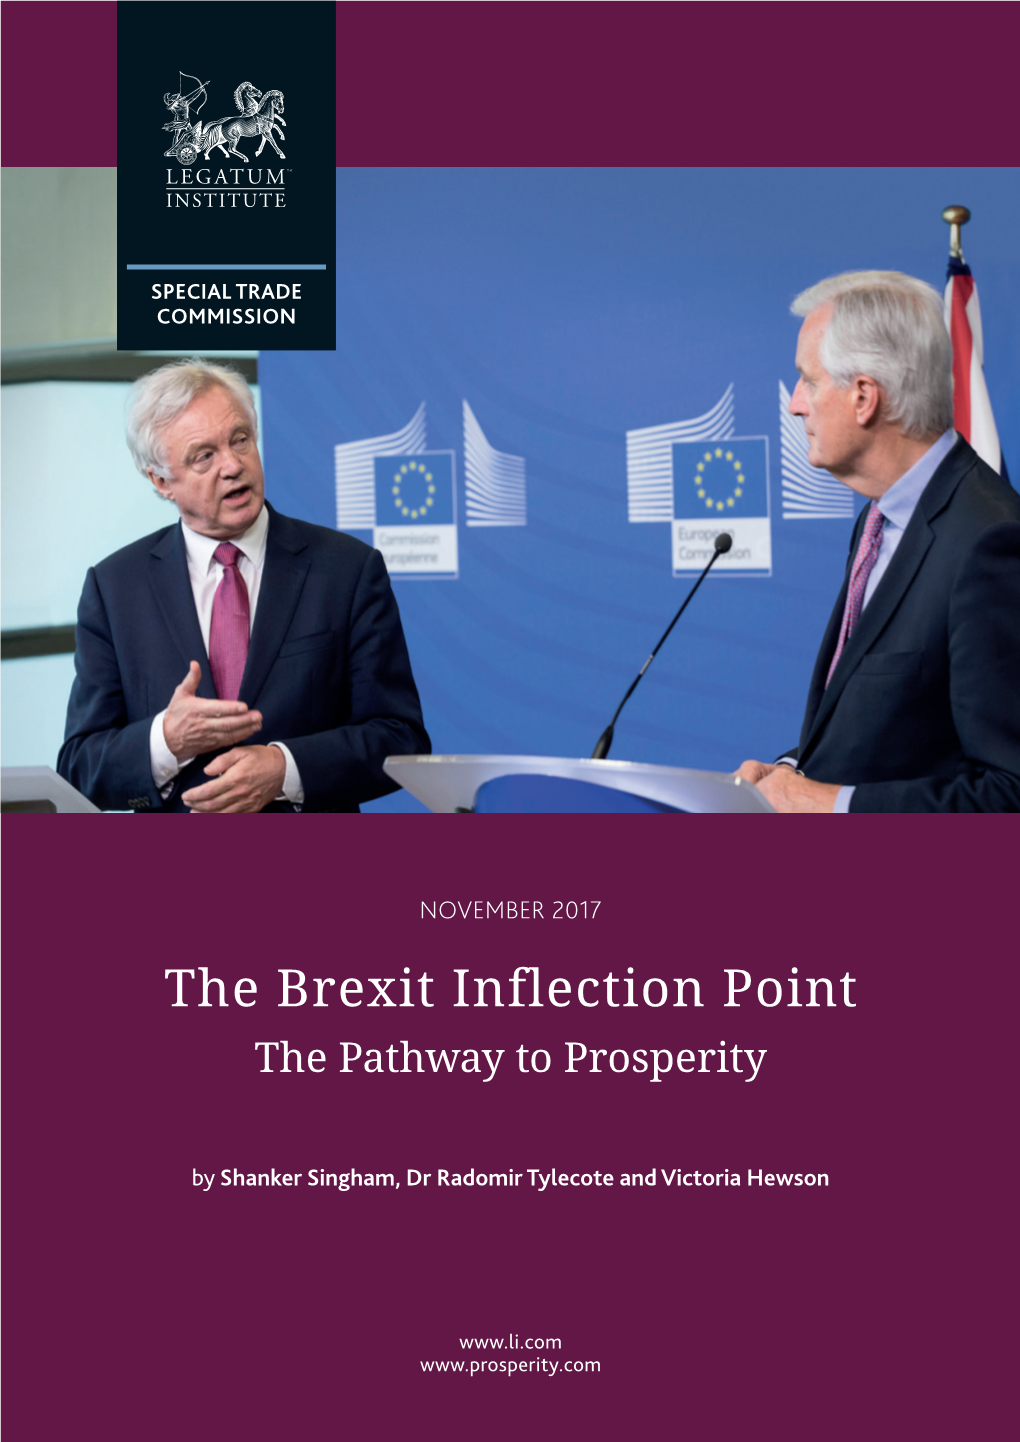 The Brexit Inflection Point: the Pathway to Prosperity